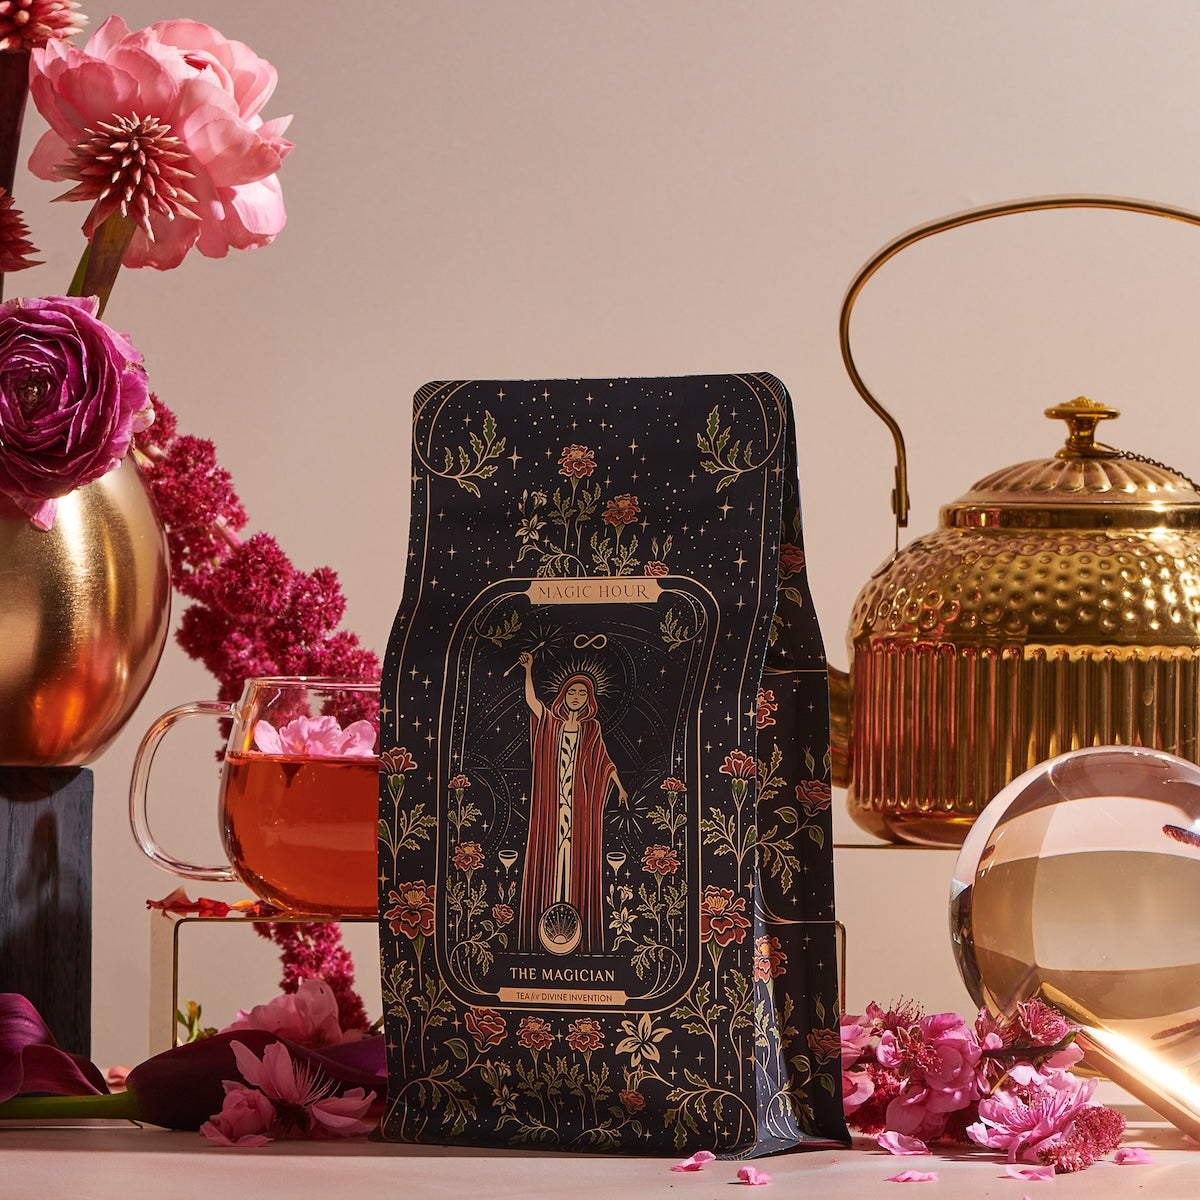 A beautifully decorated tea package titled "The Magician" by Magic Hour stands amidst a visually appealing arrangement, flaunting its transformative abilities. Surrounding the tea are flowers, a glass teacup with pink tea, a gold teapot, and a clear glass globe, all set against a soft, neutral background.